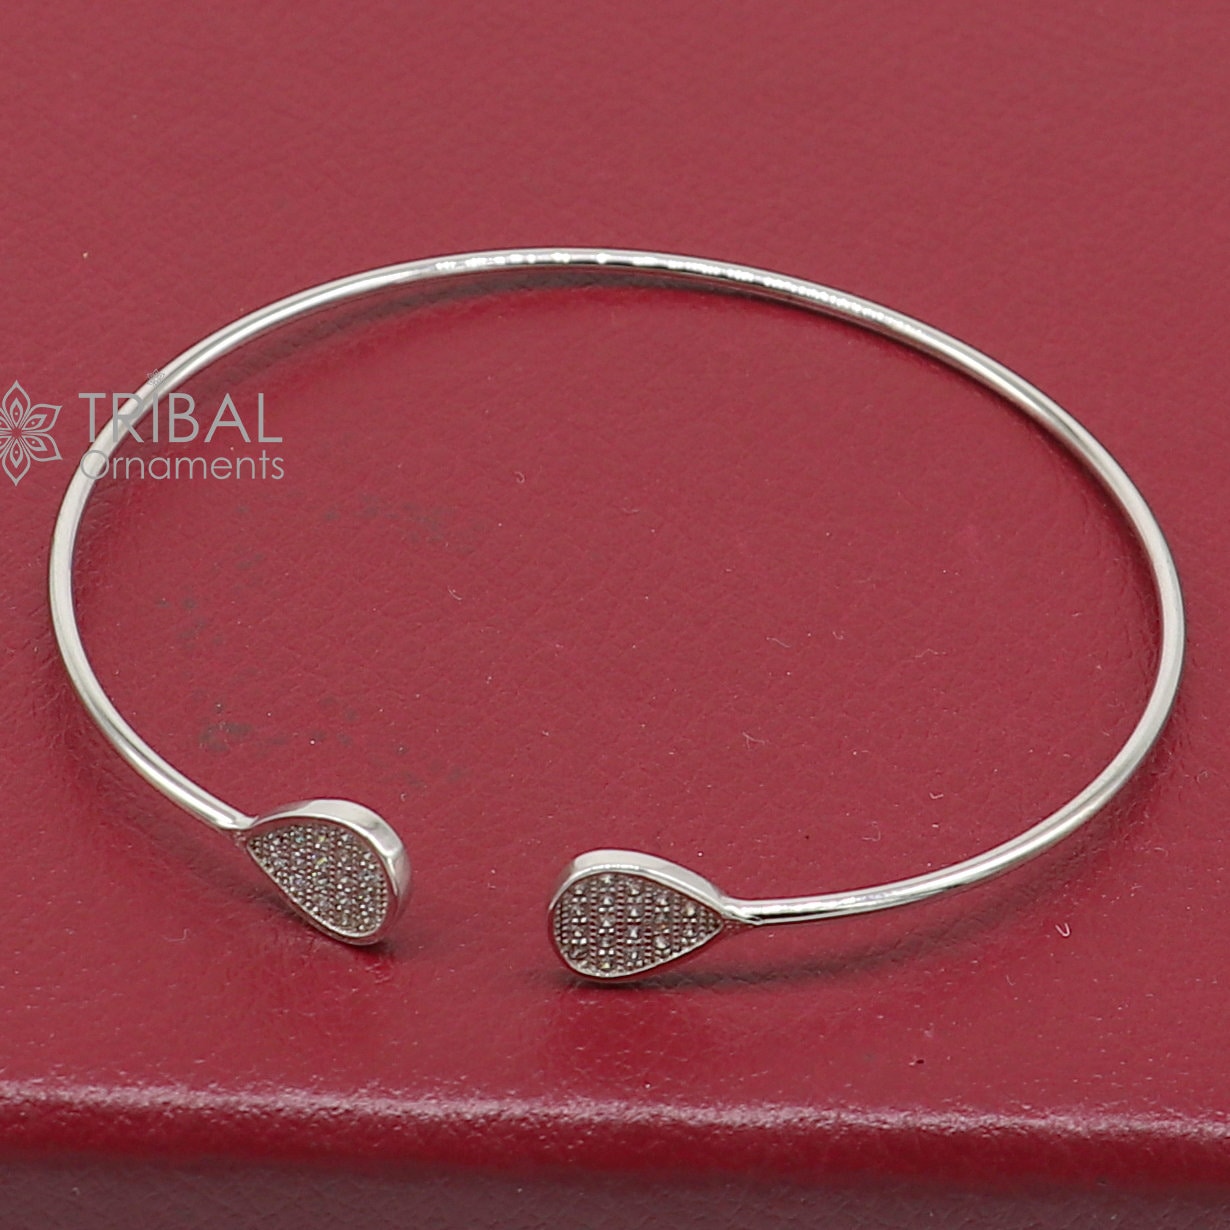 925 sterling silver handmade amazing trendy stylish girl's cuff kada bracelet, best delicate unique light weight gifting for girls cuff172 - TRIBAL ORNAMENTS